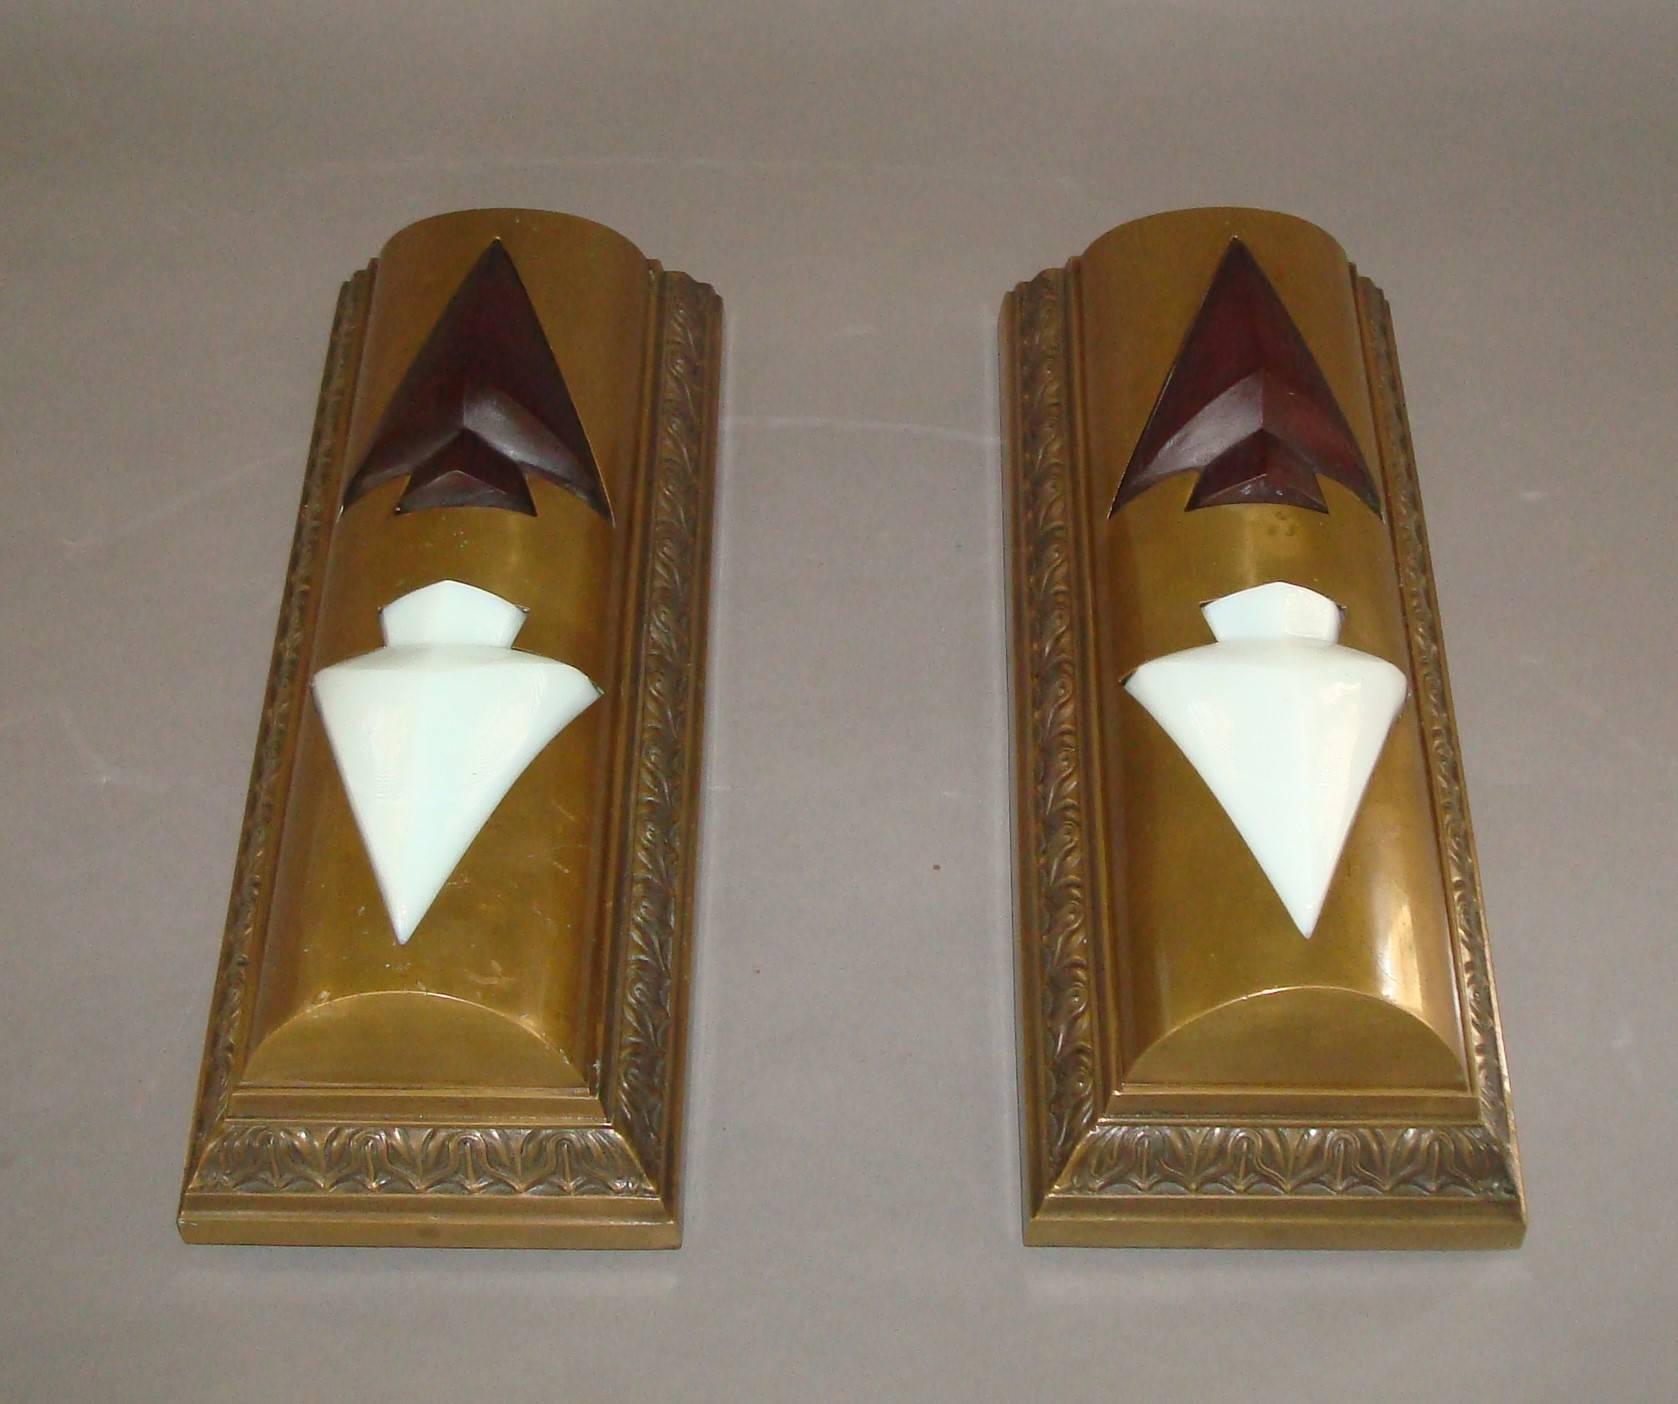 An unusual pair of bronze elevator indicator lights; of rectangular form with a cast anthemion moulding, the domed front housing the raised arrows in red and white glass. 

With original iron back plate and fittings which hold two bulbs.